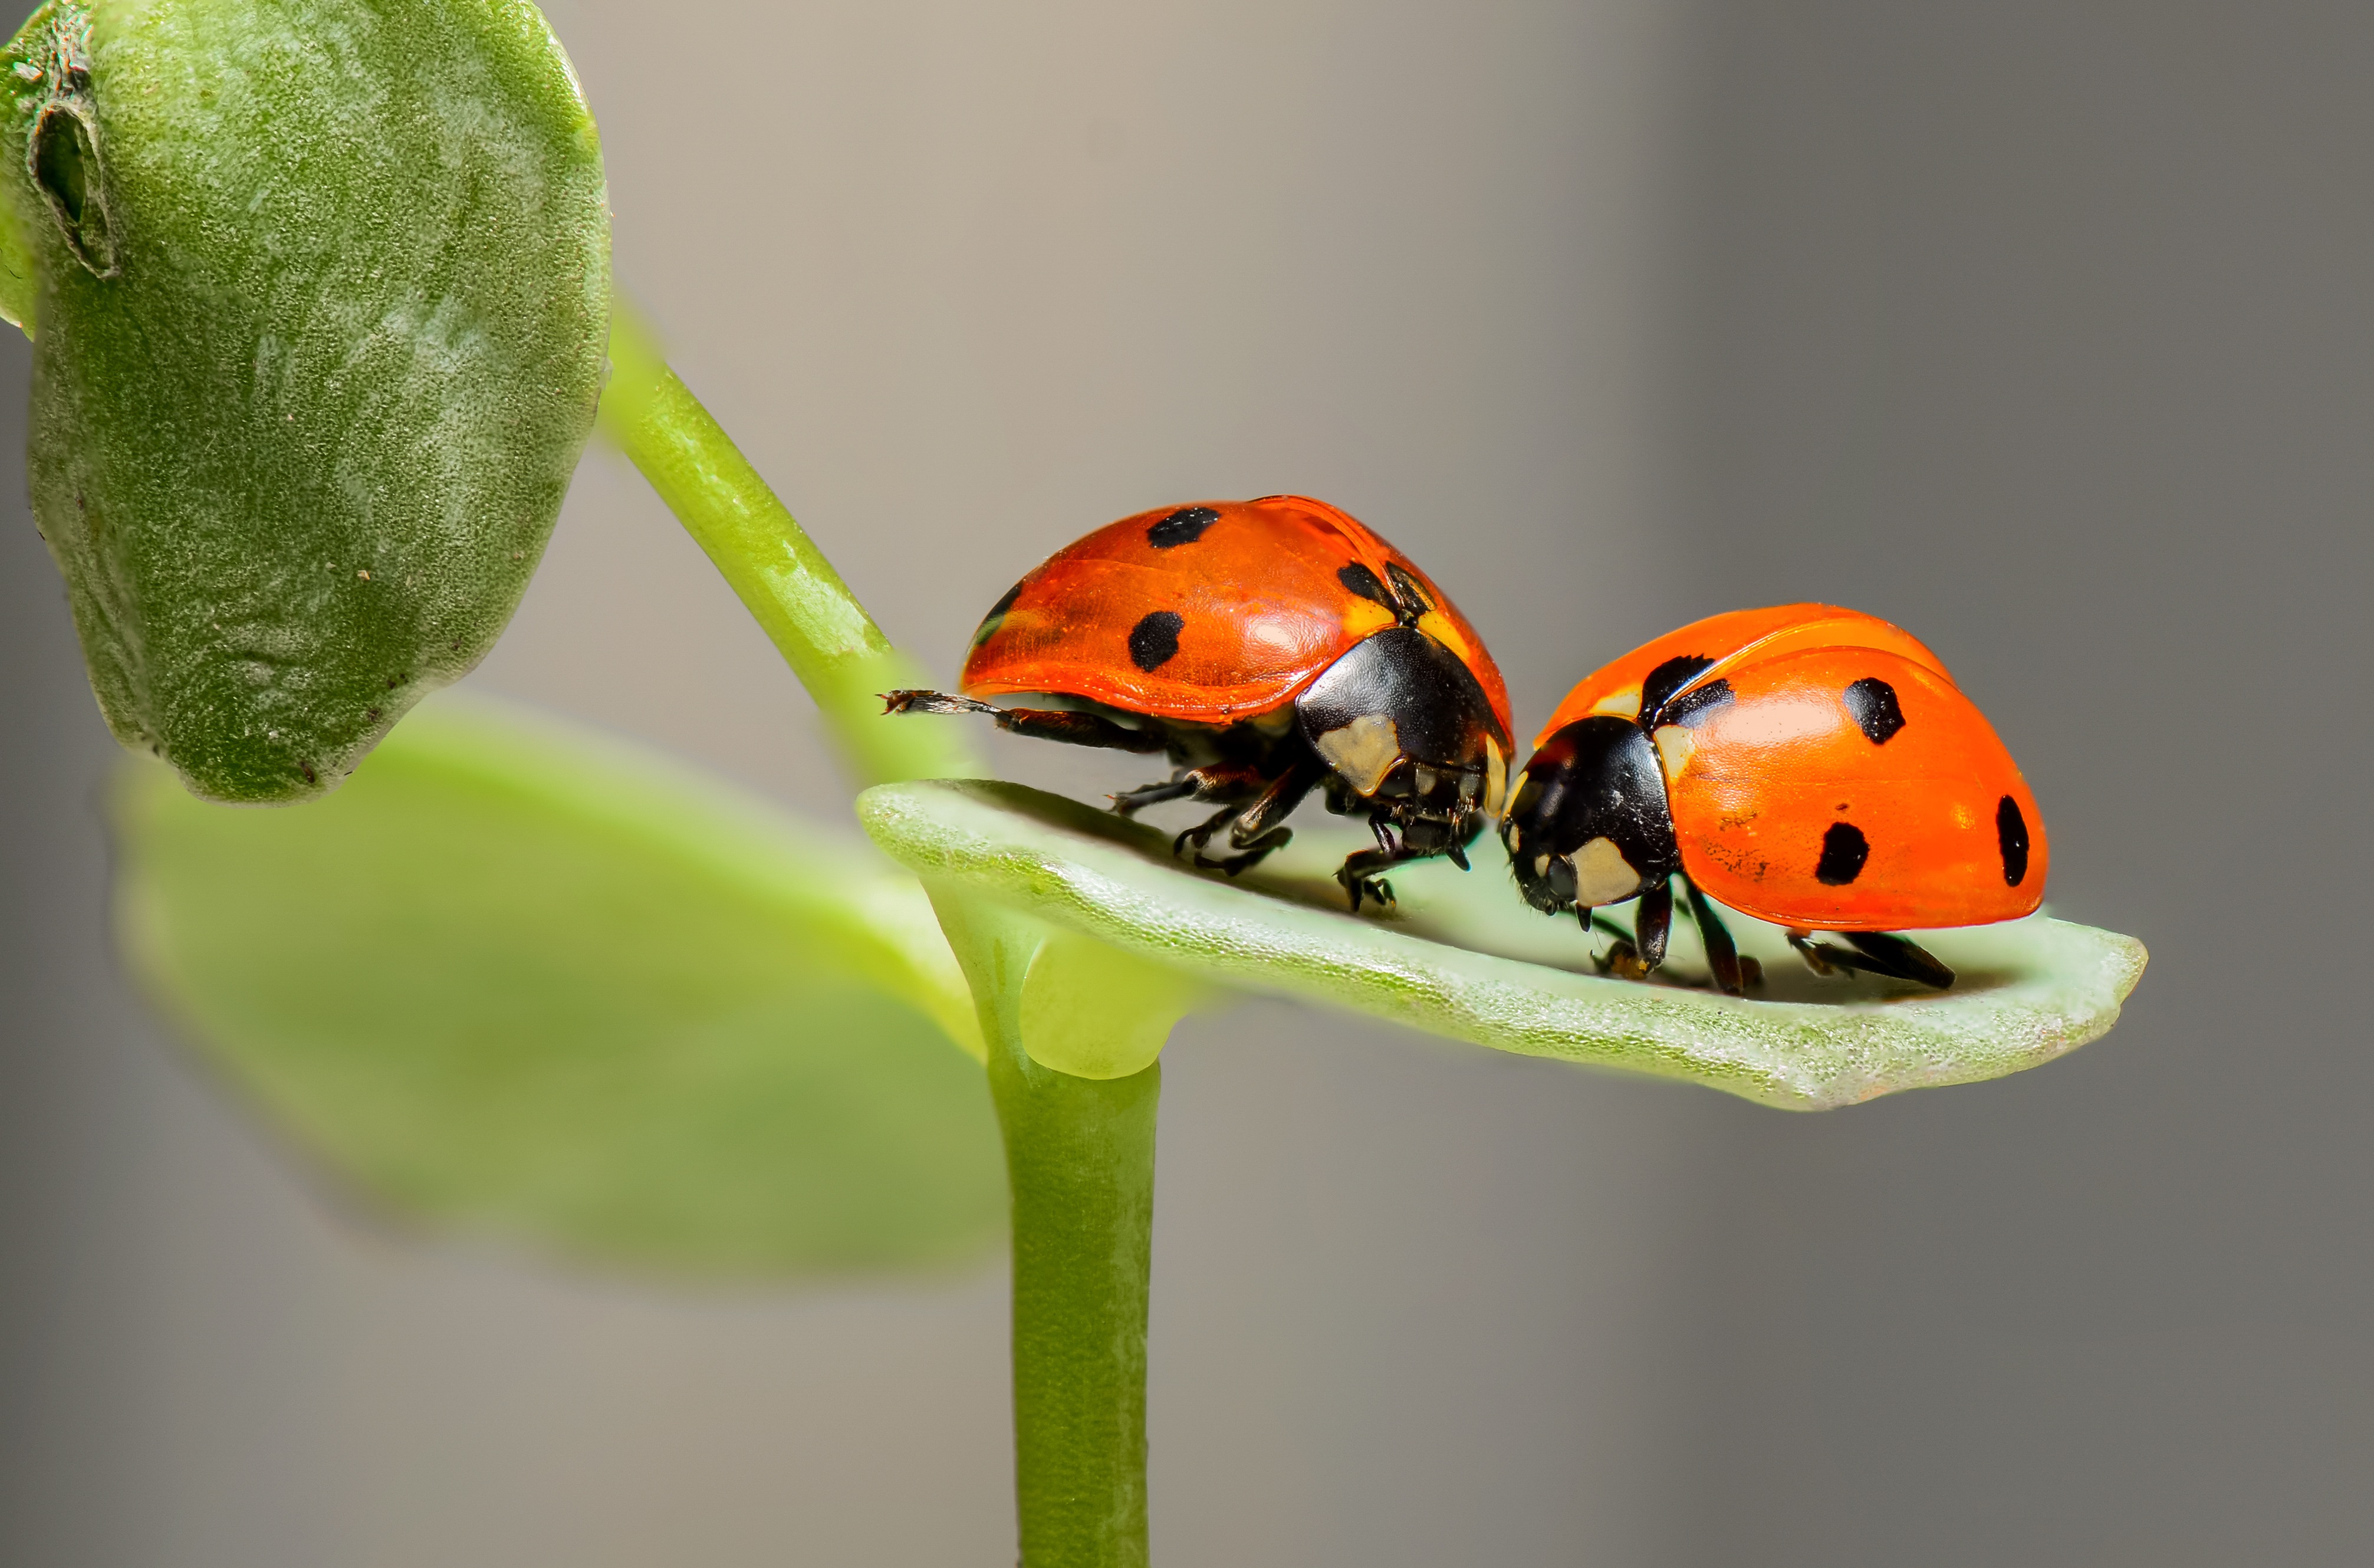 Two lady bugs